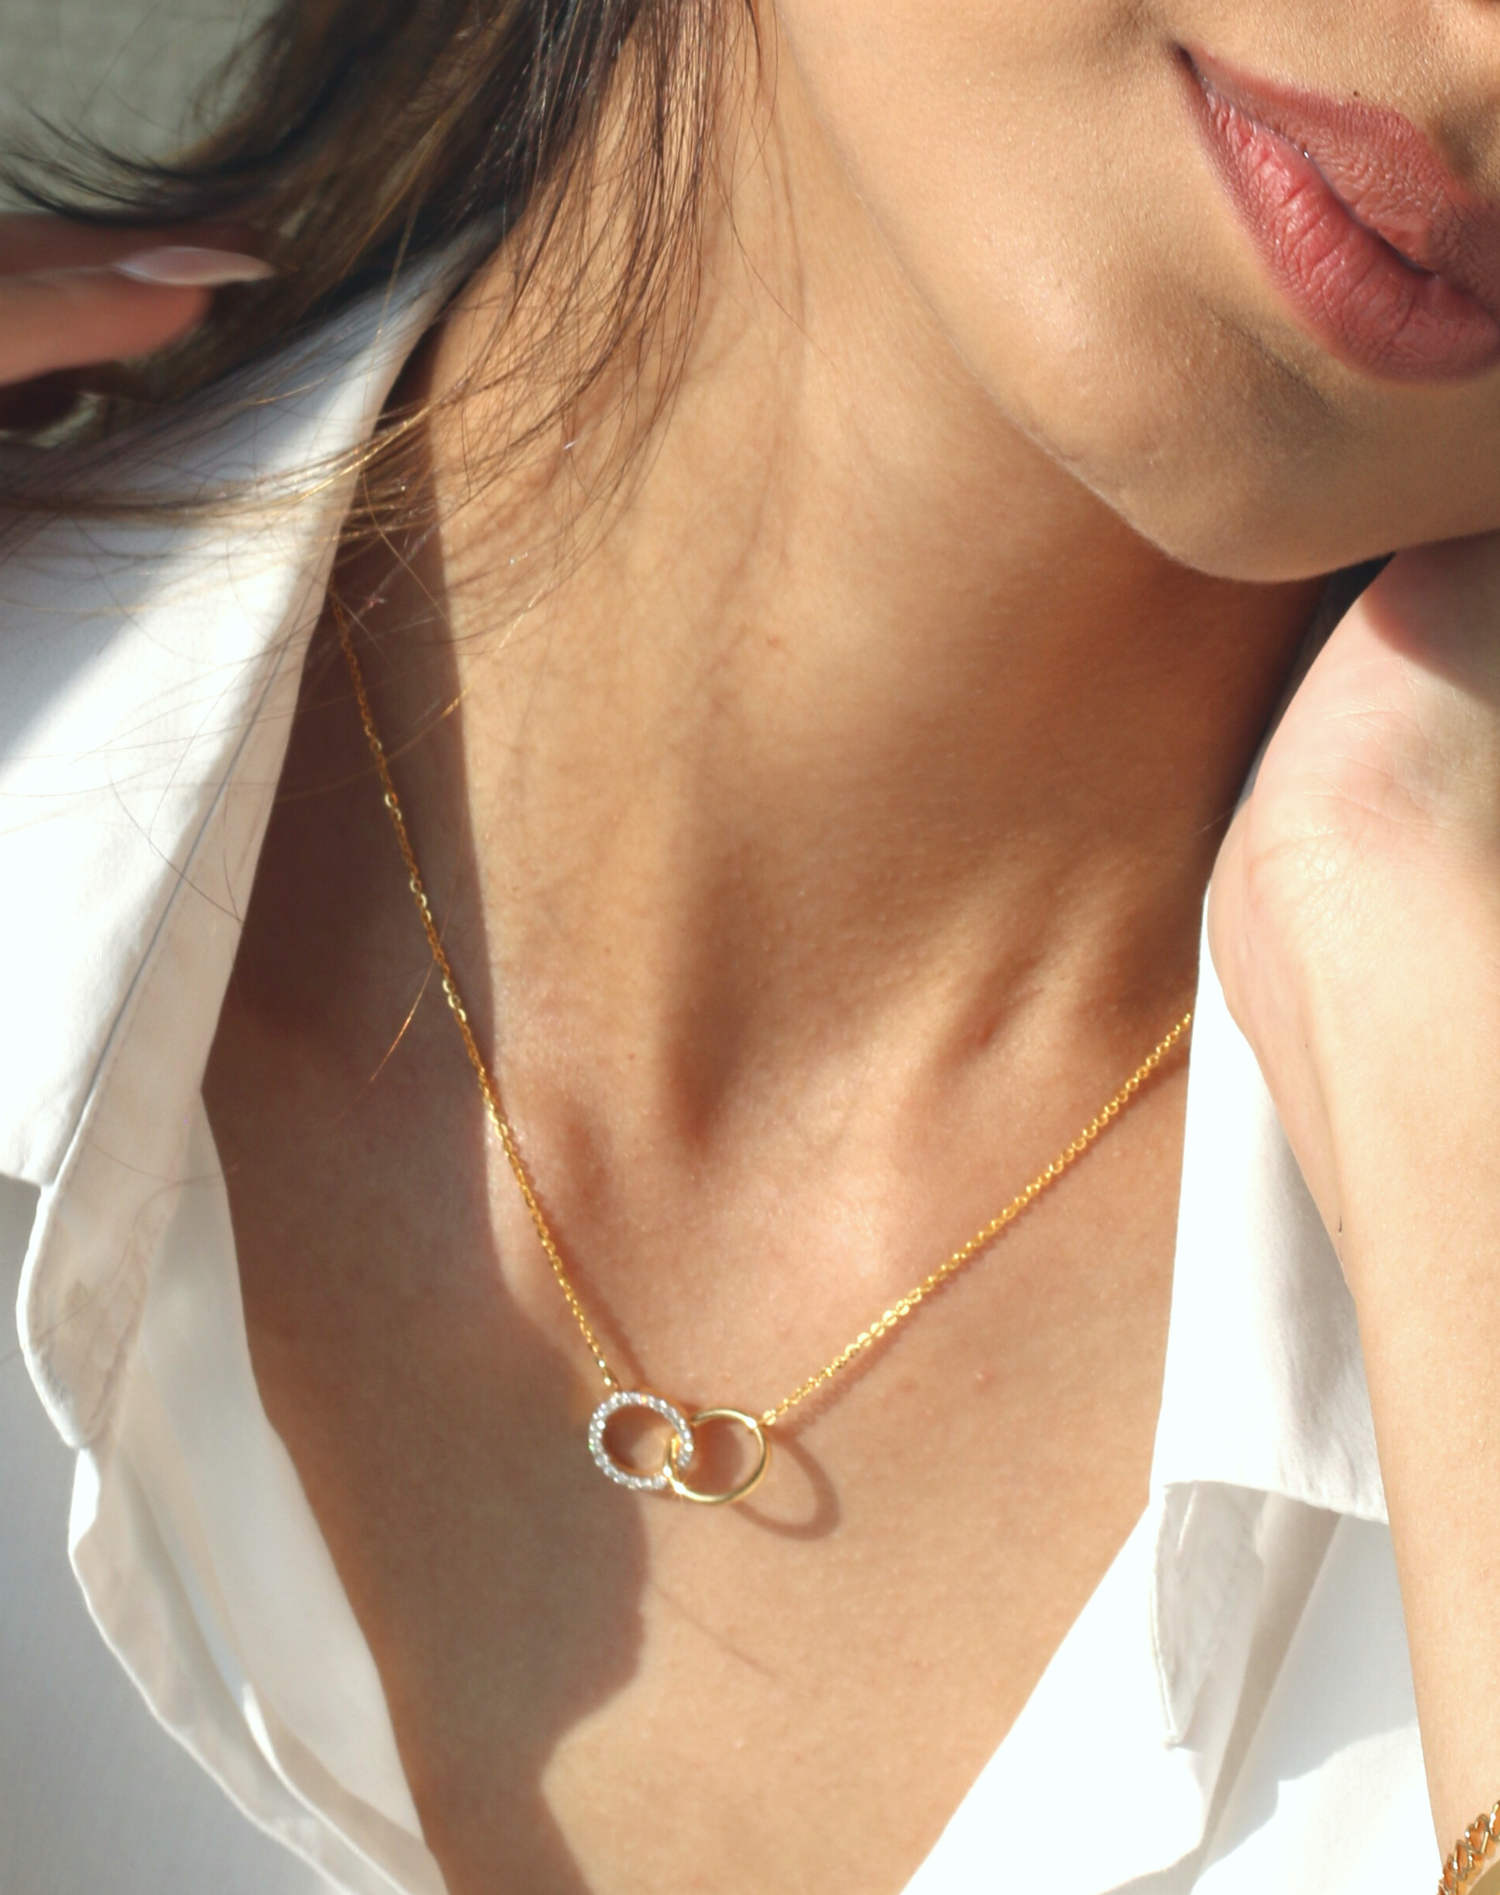 Buy Infinity Necklace Sterling Silver, 4 Circle Necklace for Mom With 4  Kids, Linked Circle Family of Four Jewelry Gift Rose Gold, 14k Gold Fill  Online in India - Etsy